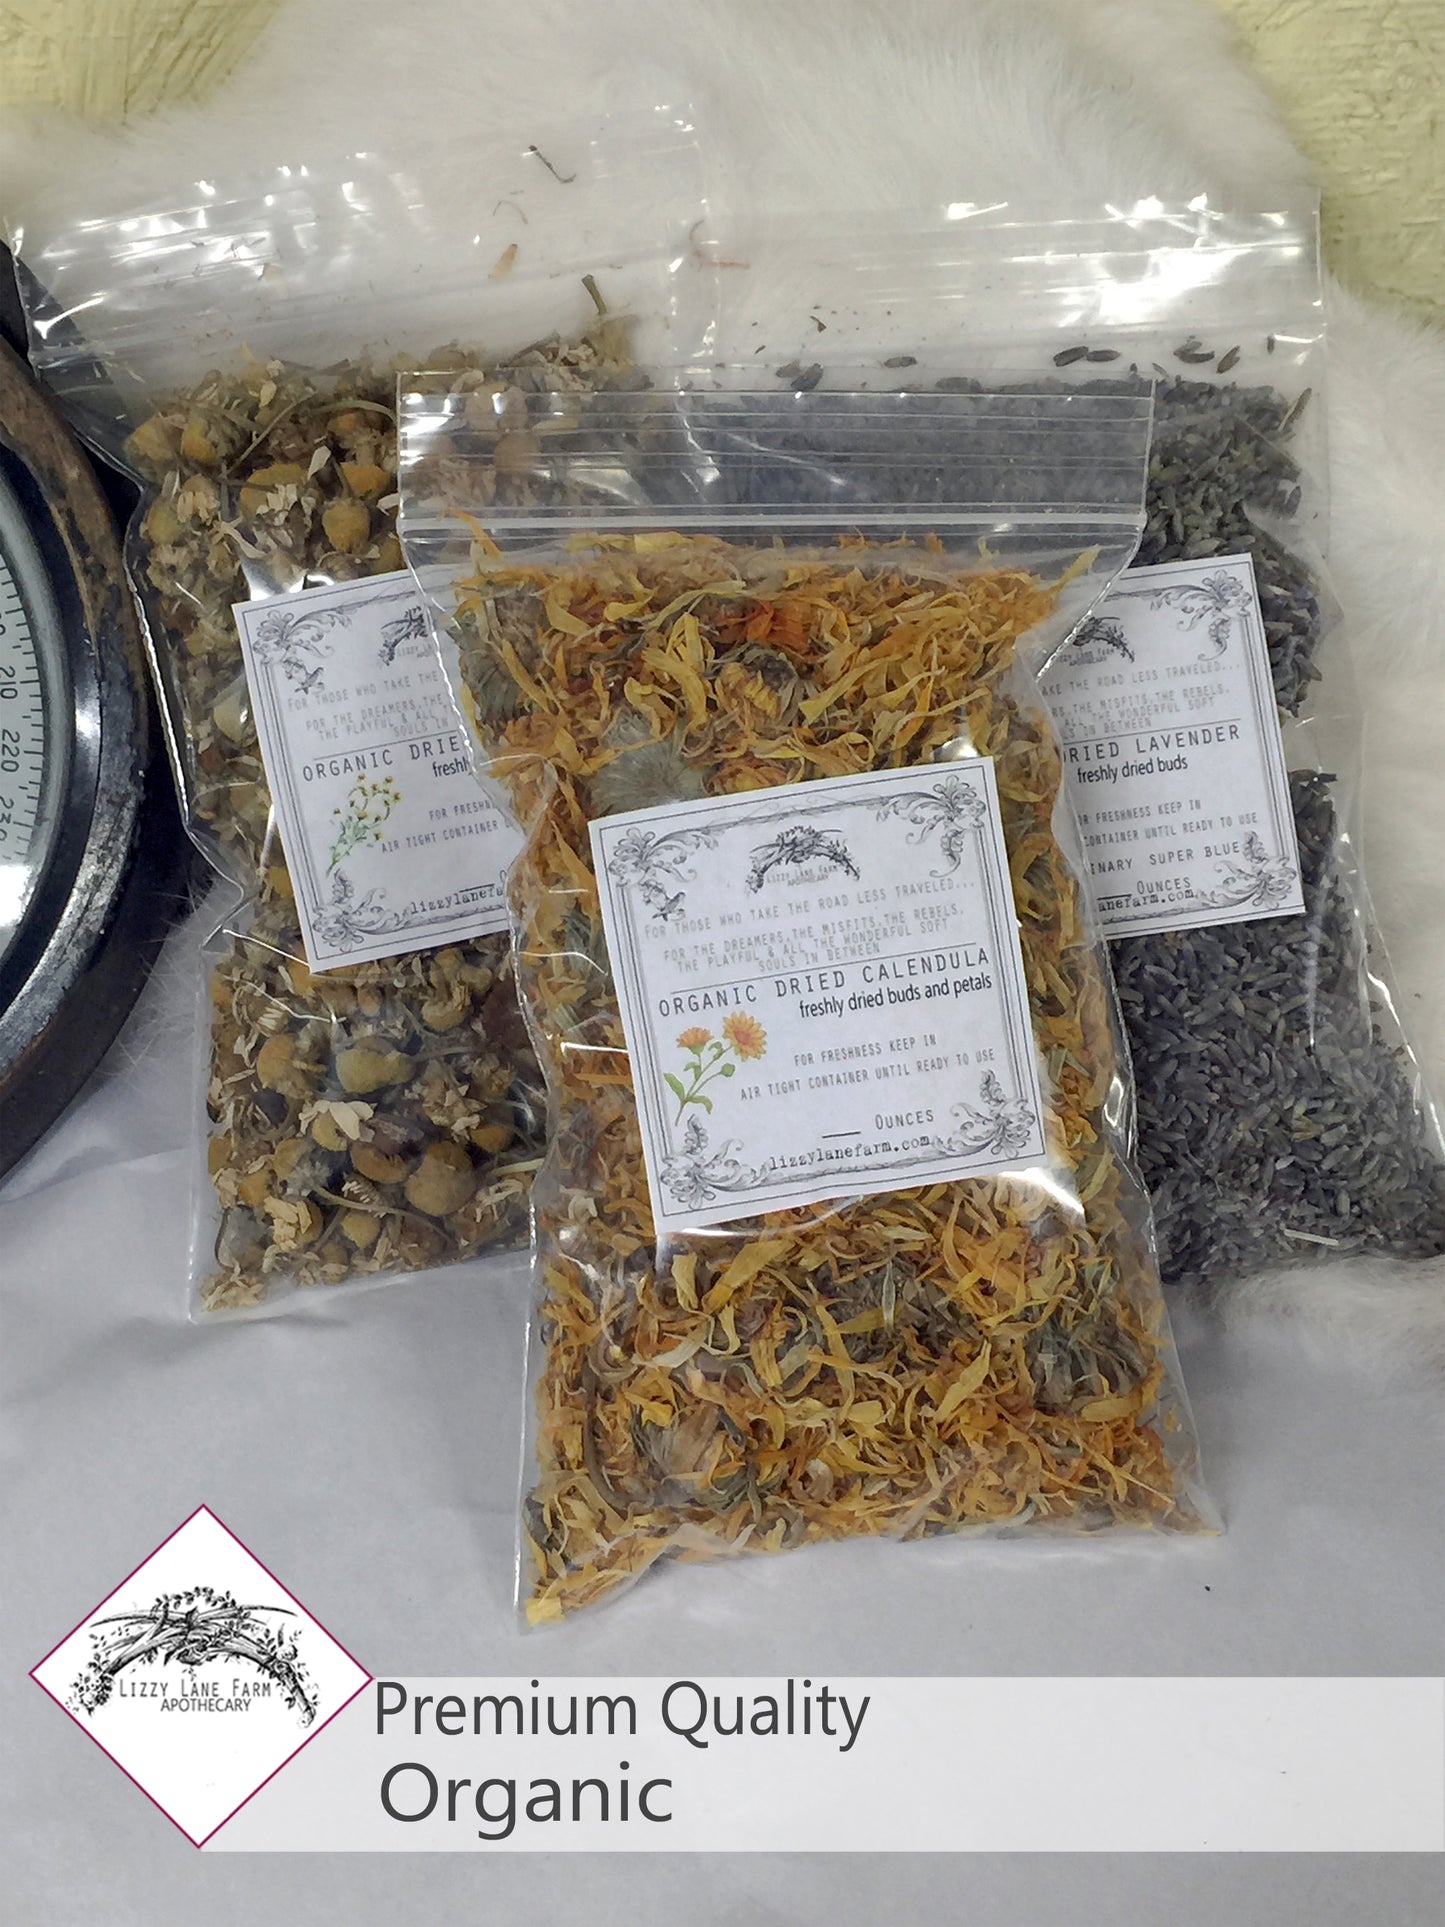 Red Rose Buds & Petals: Organic Loose Dried Rose Buds - Lizzy Lane Farm Apothecary